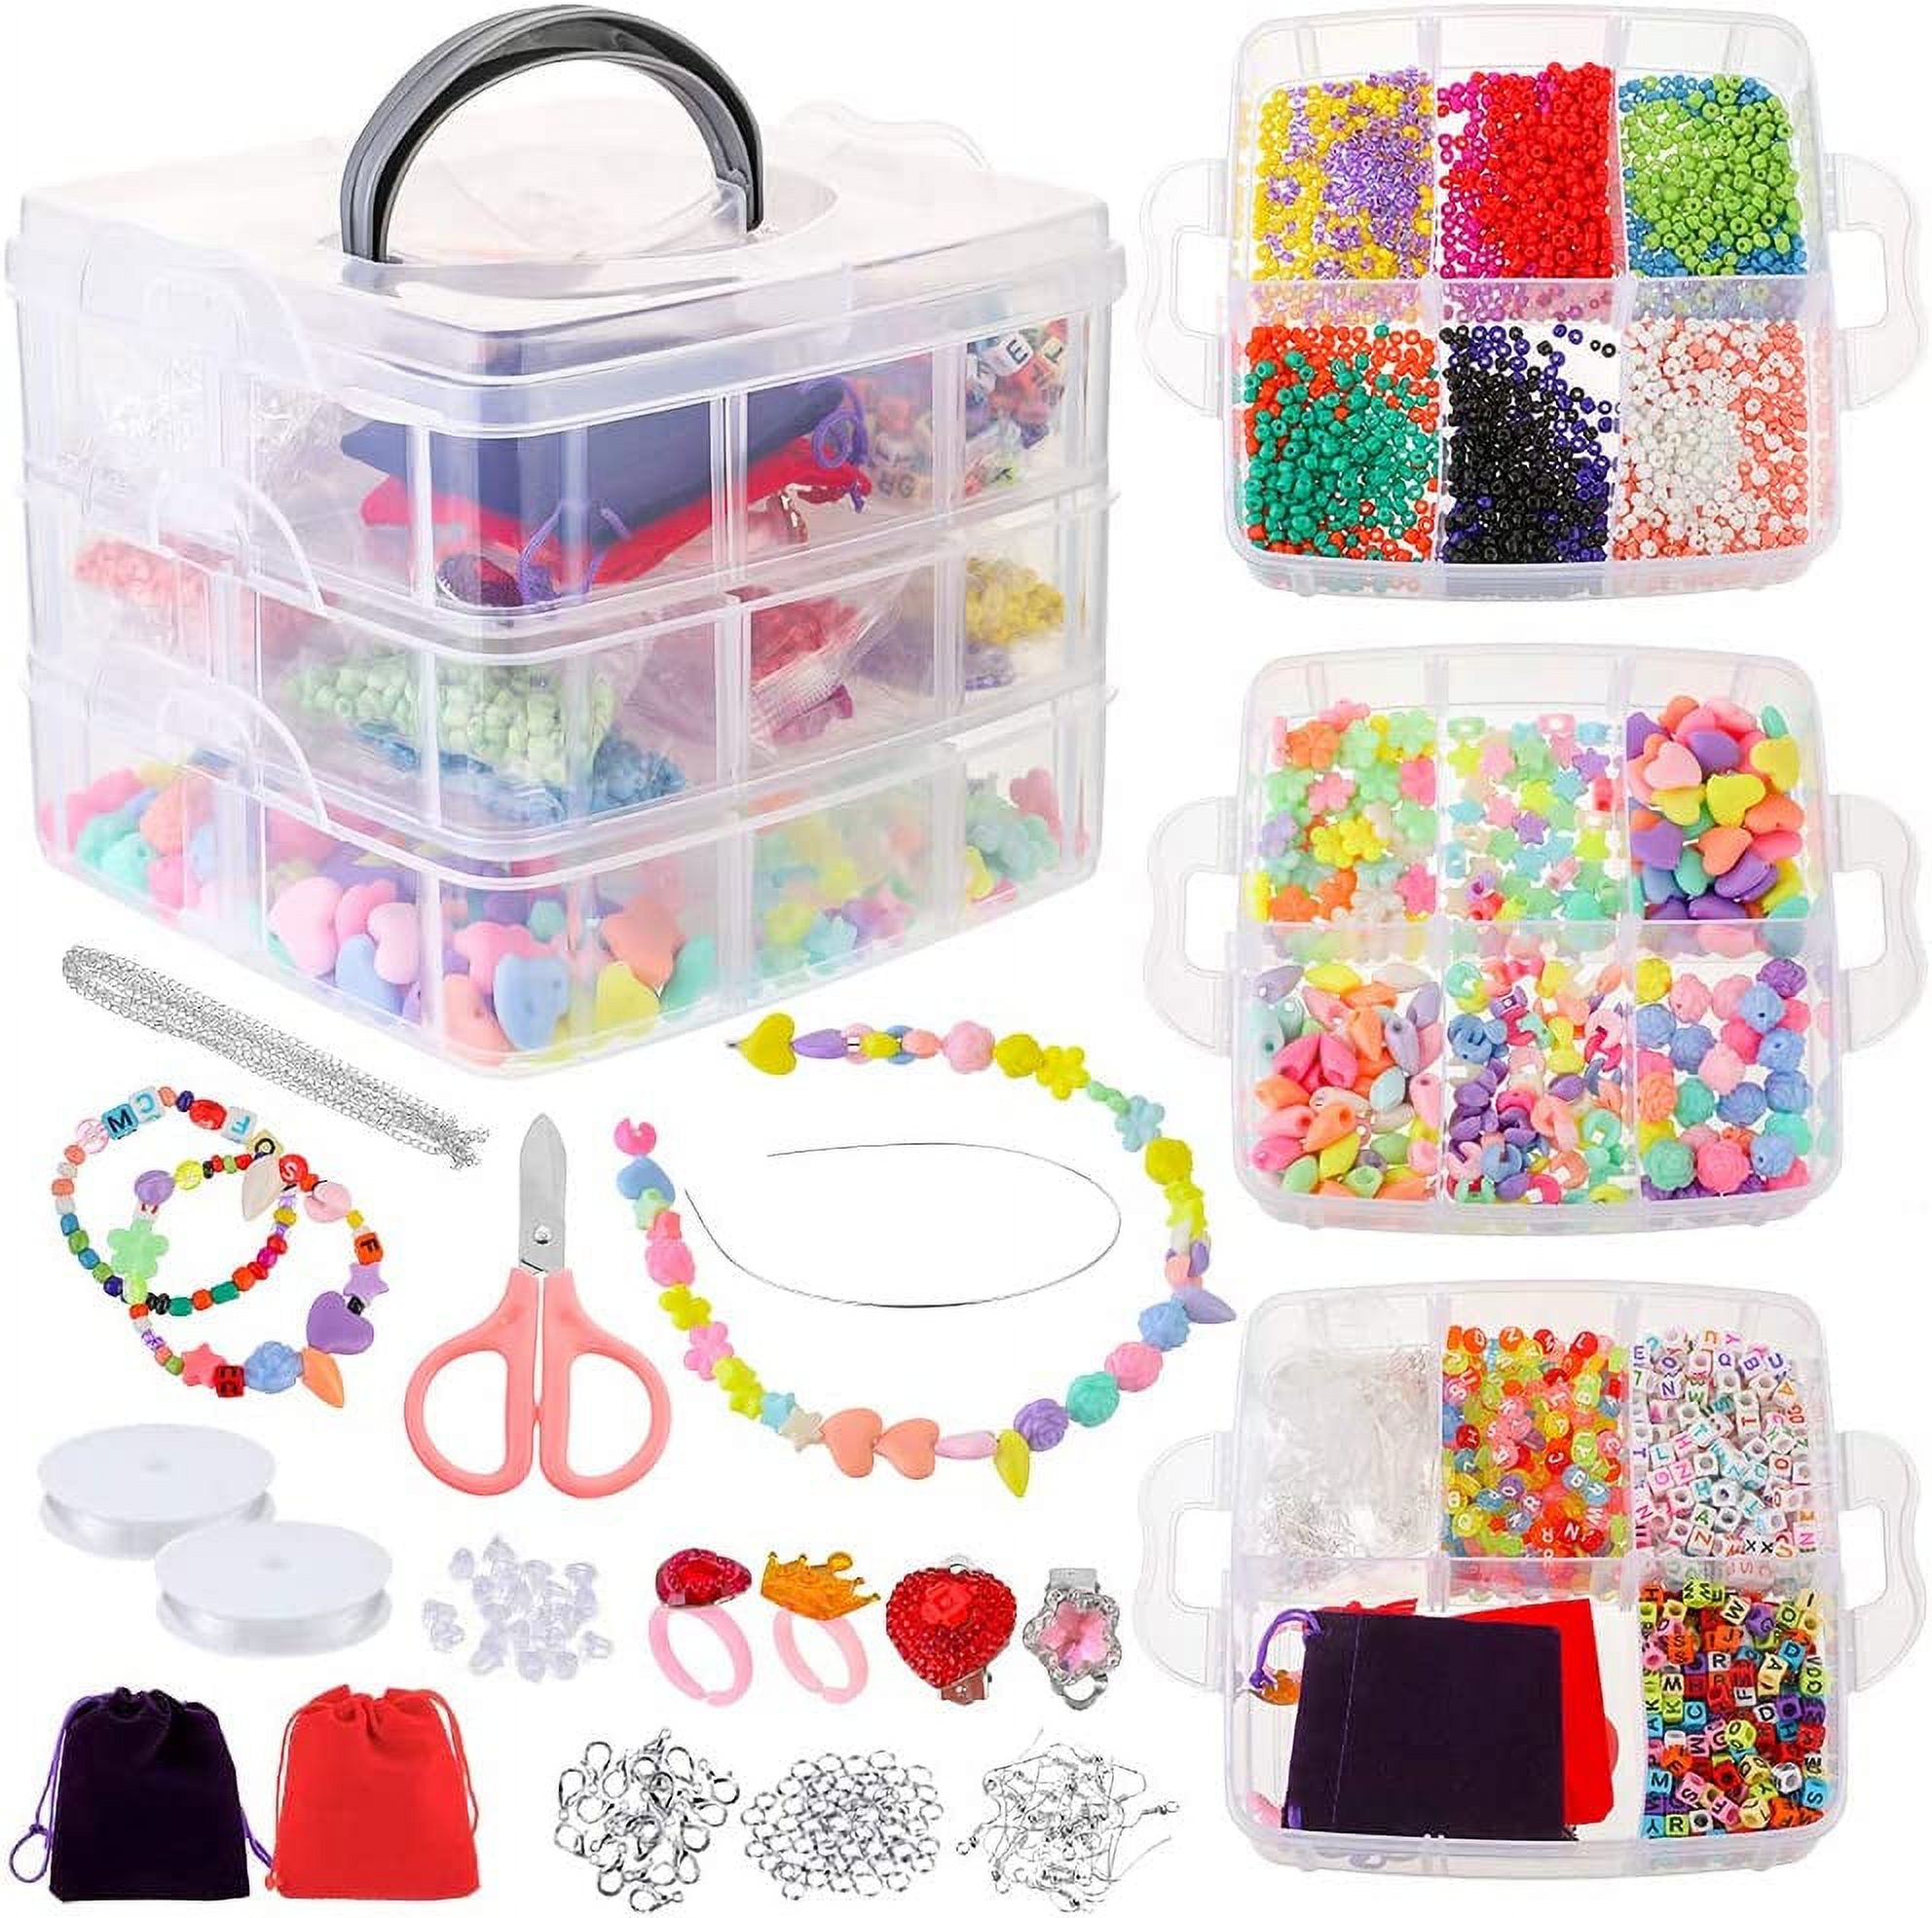 Jewelry Making Kit,Jewelry Making Supplies 7544PCS Include Jewelry Beads and Charms Findings Beading Wire for Necklace Bracelet Earrings Making Repair Jewelry Making Tools Kits for Adults - image 1 of 9